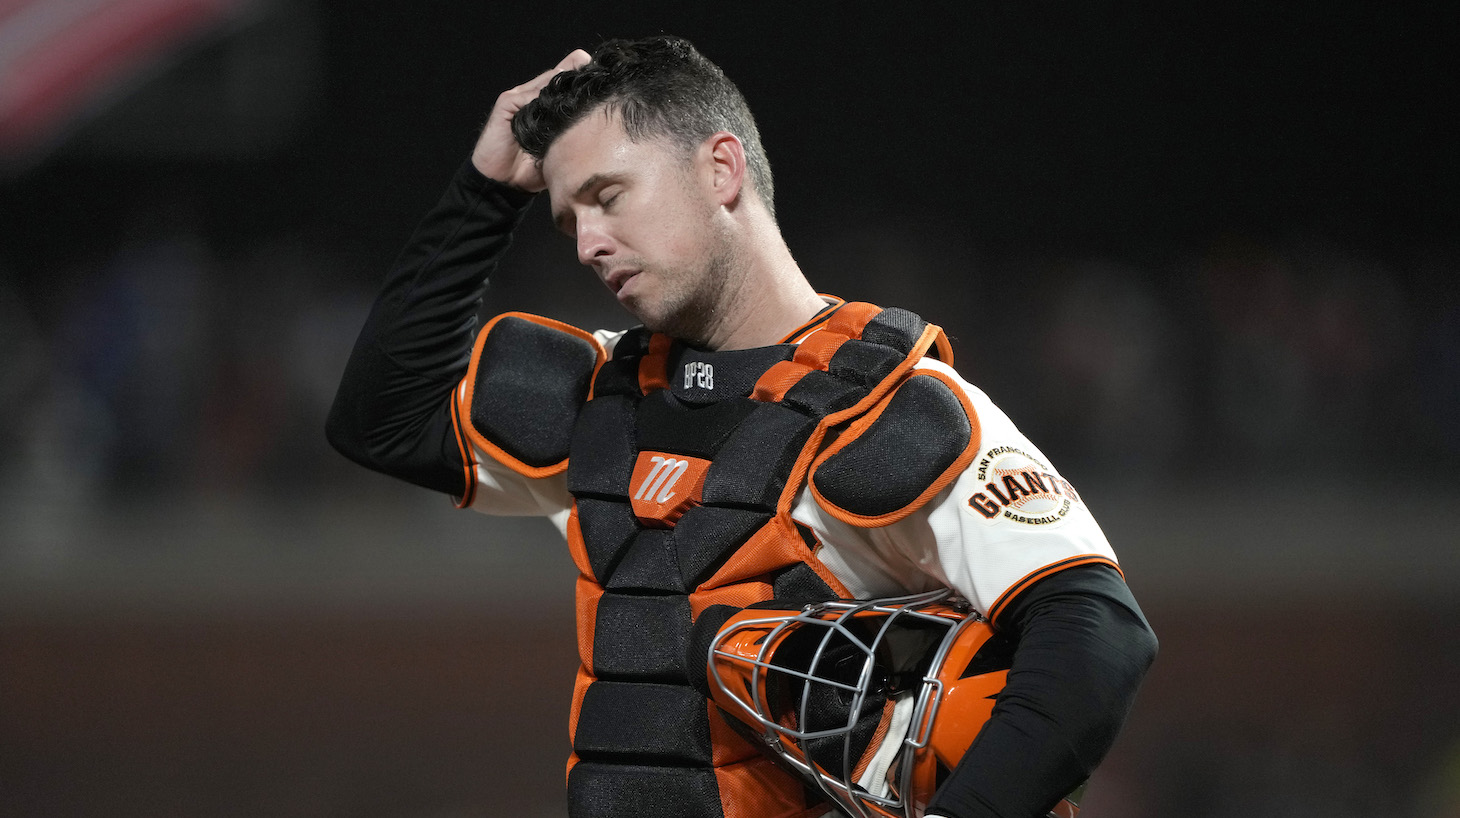 SAN FRANCISCO, CALIFORNIA - OCTOBER 14: Buster Posey #28 of the San Francisco Giants reacts after a single by Gavin Lux #9 of the Los Angeles Dodgers during the ninth inning in game 5 of the National League Division Series at Oracle Park on October 14, 2021 in San Francisco, California. (Photo by Thearon W. Henderson/Getty Images)